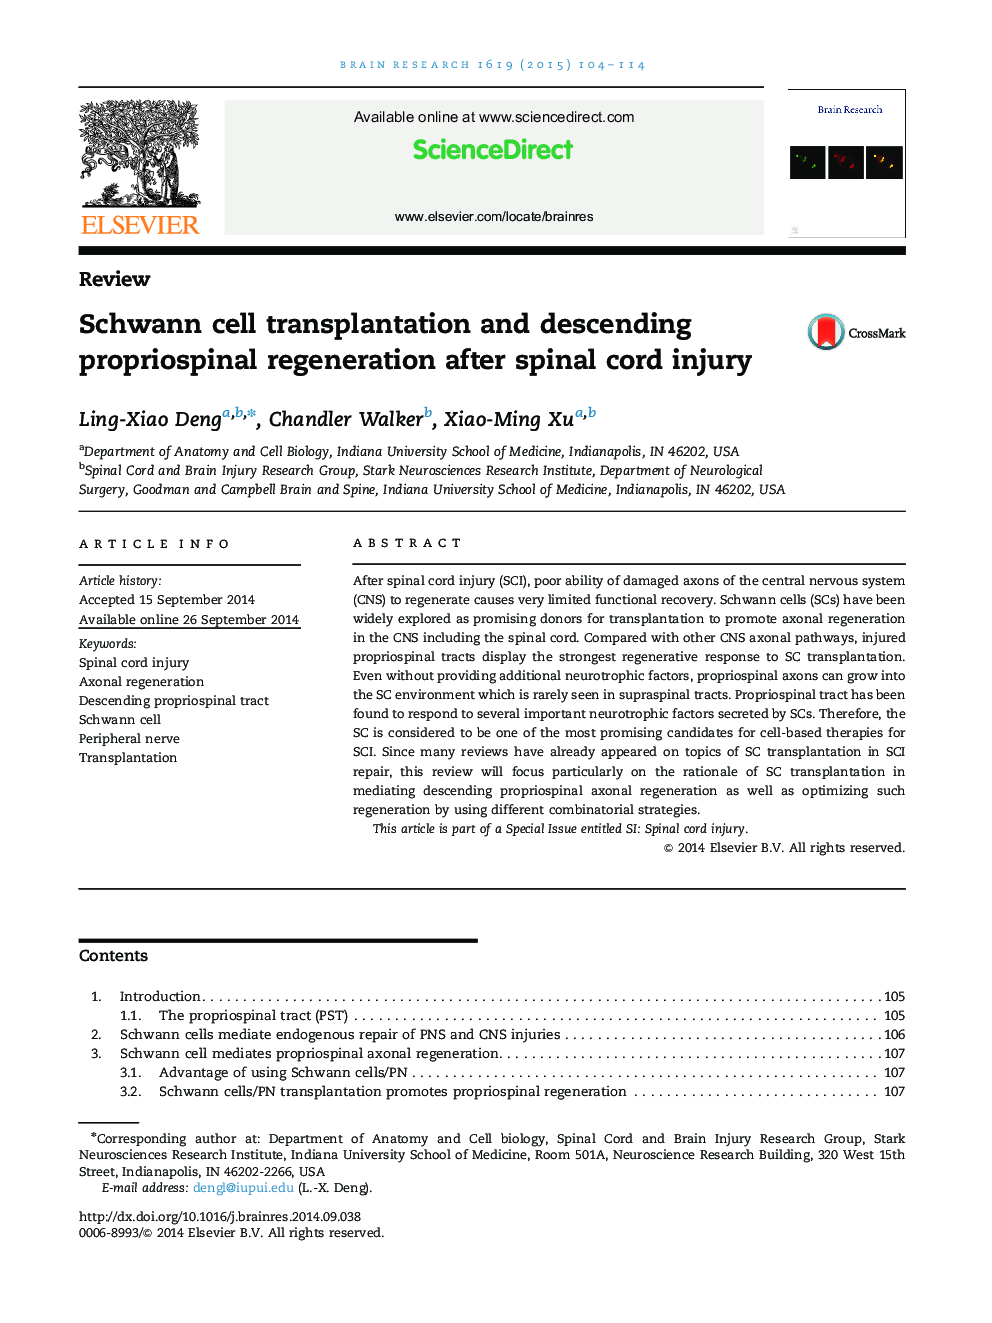 ReviewSchwann cell transplantation and descending propriospinal regeneration after spinal cord injury